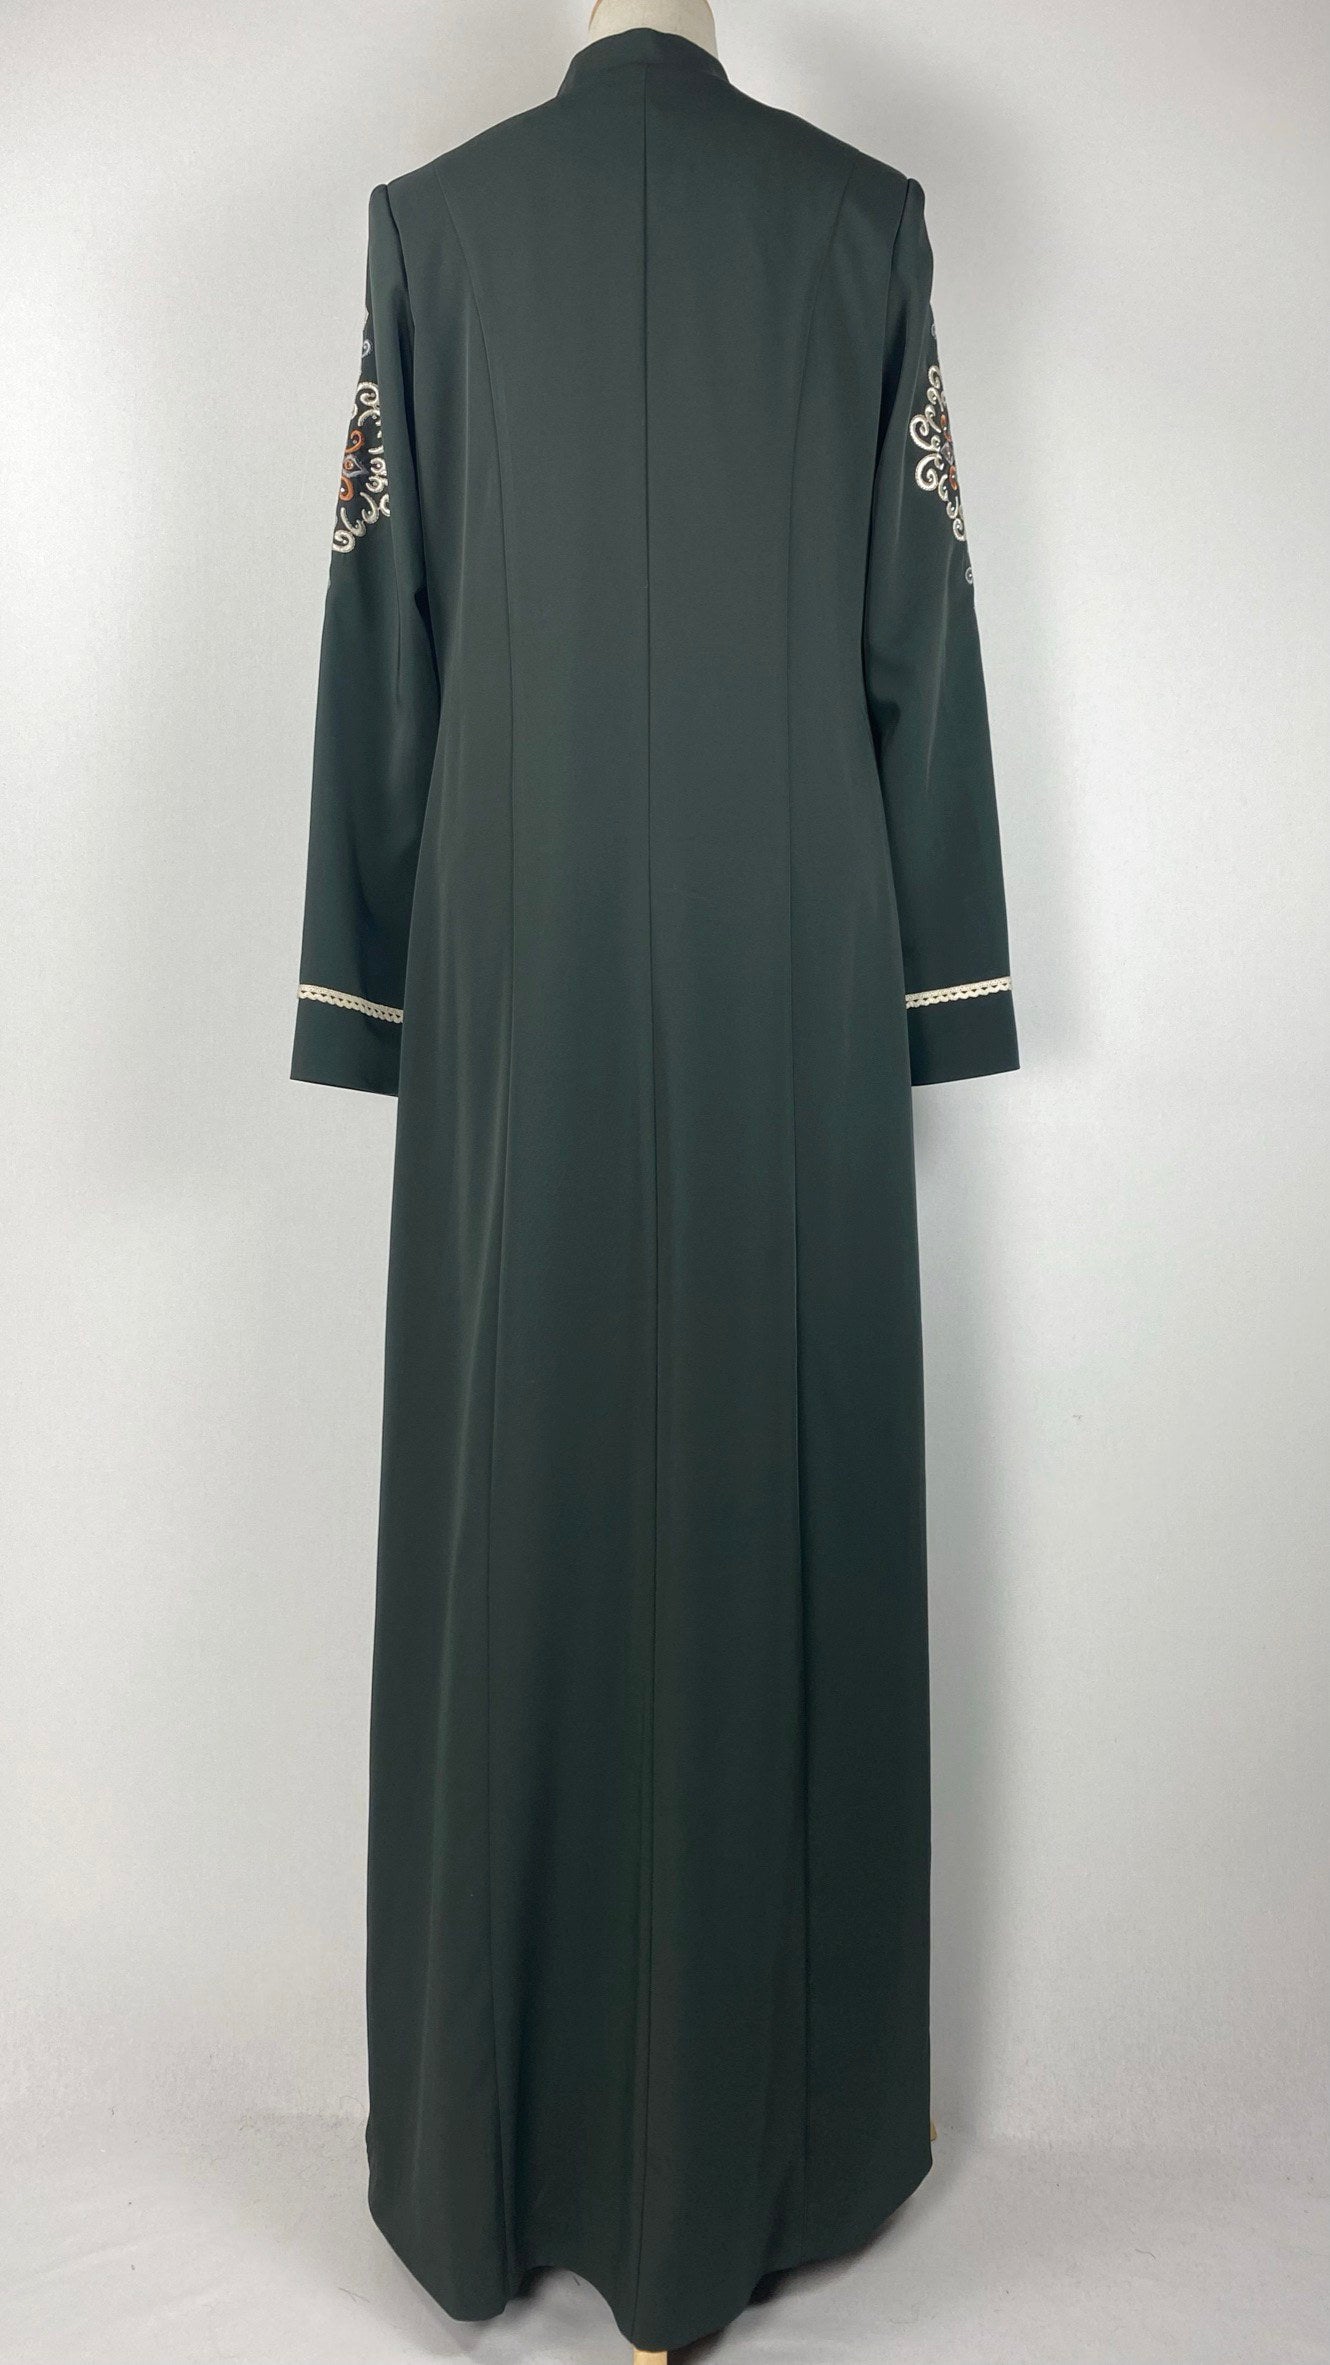 Long Sleeve Zip Up Abaya with Embroidery, Green